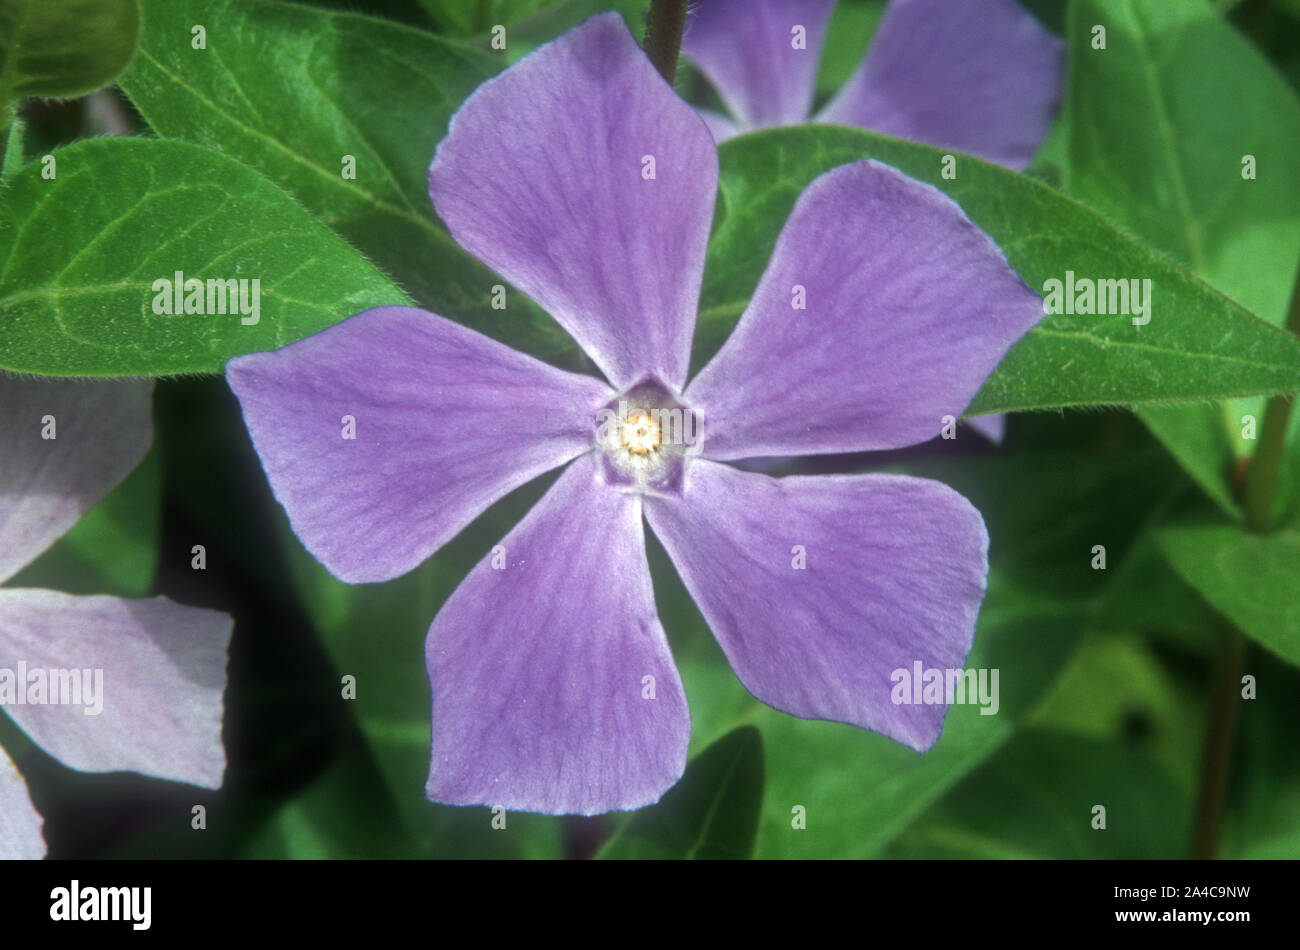 CLOSE-UP OF A VINCA MAJOR FLOWER (KNOWN AS BIGLEAF PERIWINKLE, LARGE PERIWINKLE, GREATER AND BLUE PERIWINKLE) Stock Photo